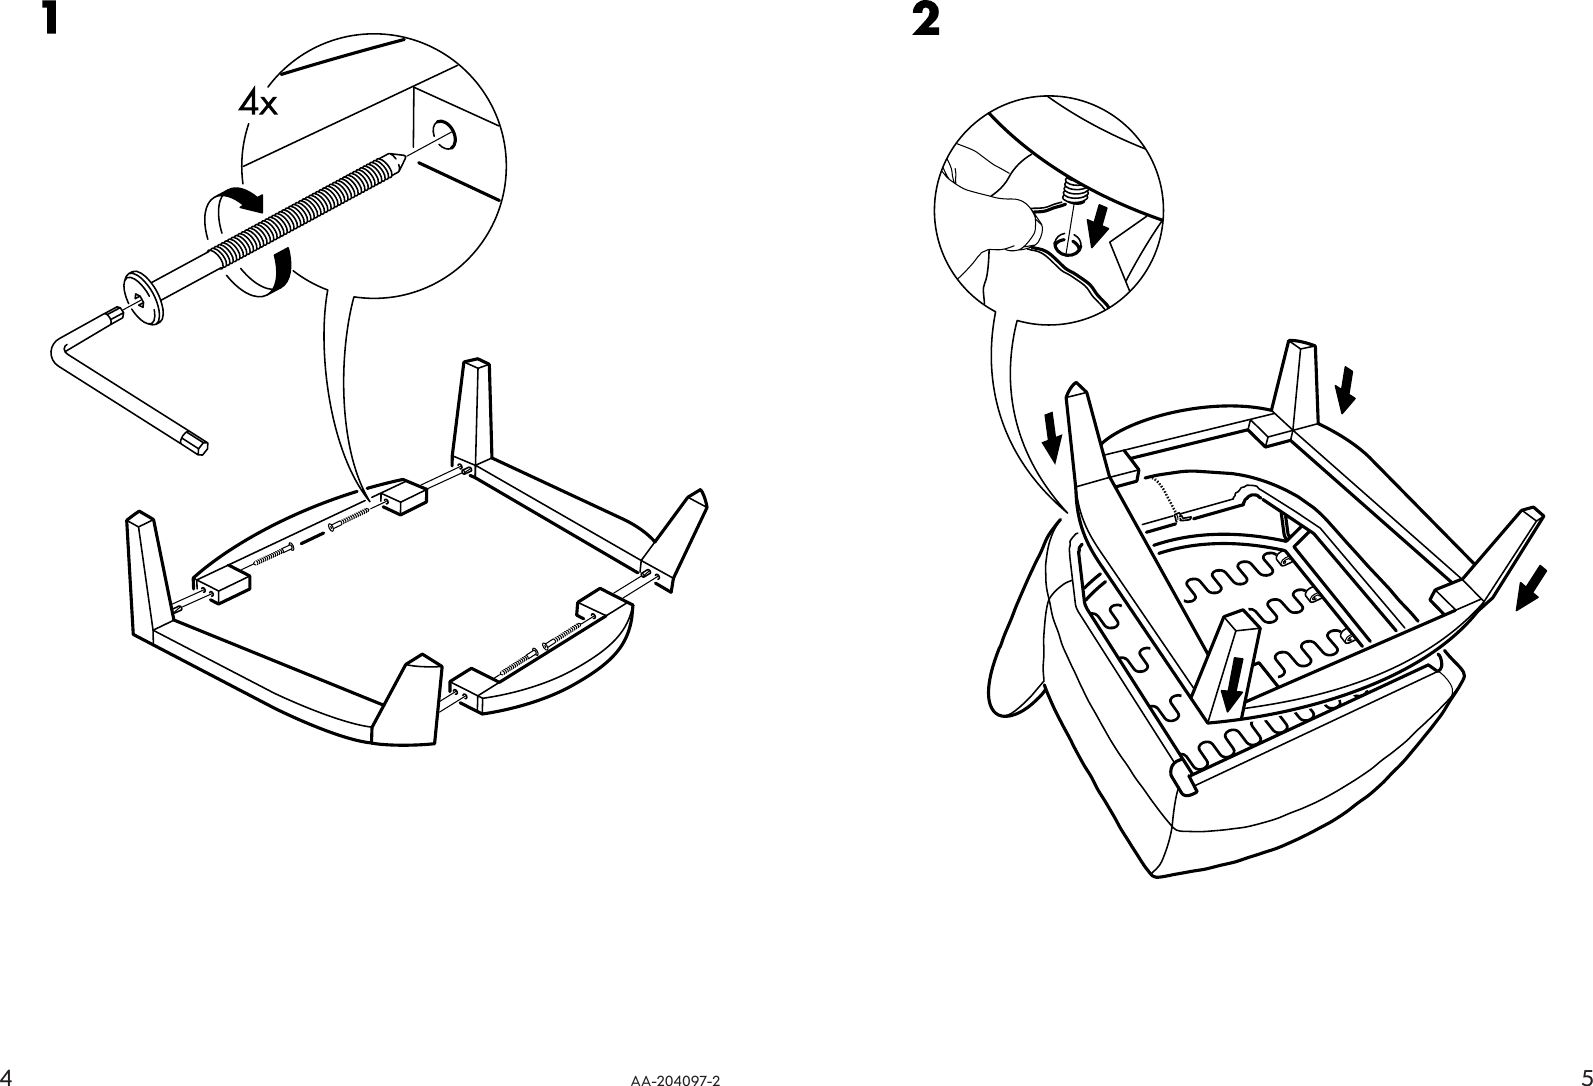 Page 4 of 4 - Ikea Ikea-Ikea-Stockholm-Easy-Chair-Frame-Assembly-Instruction